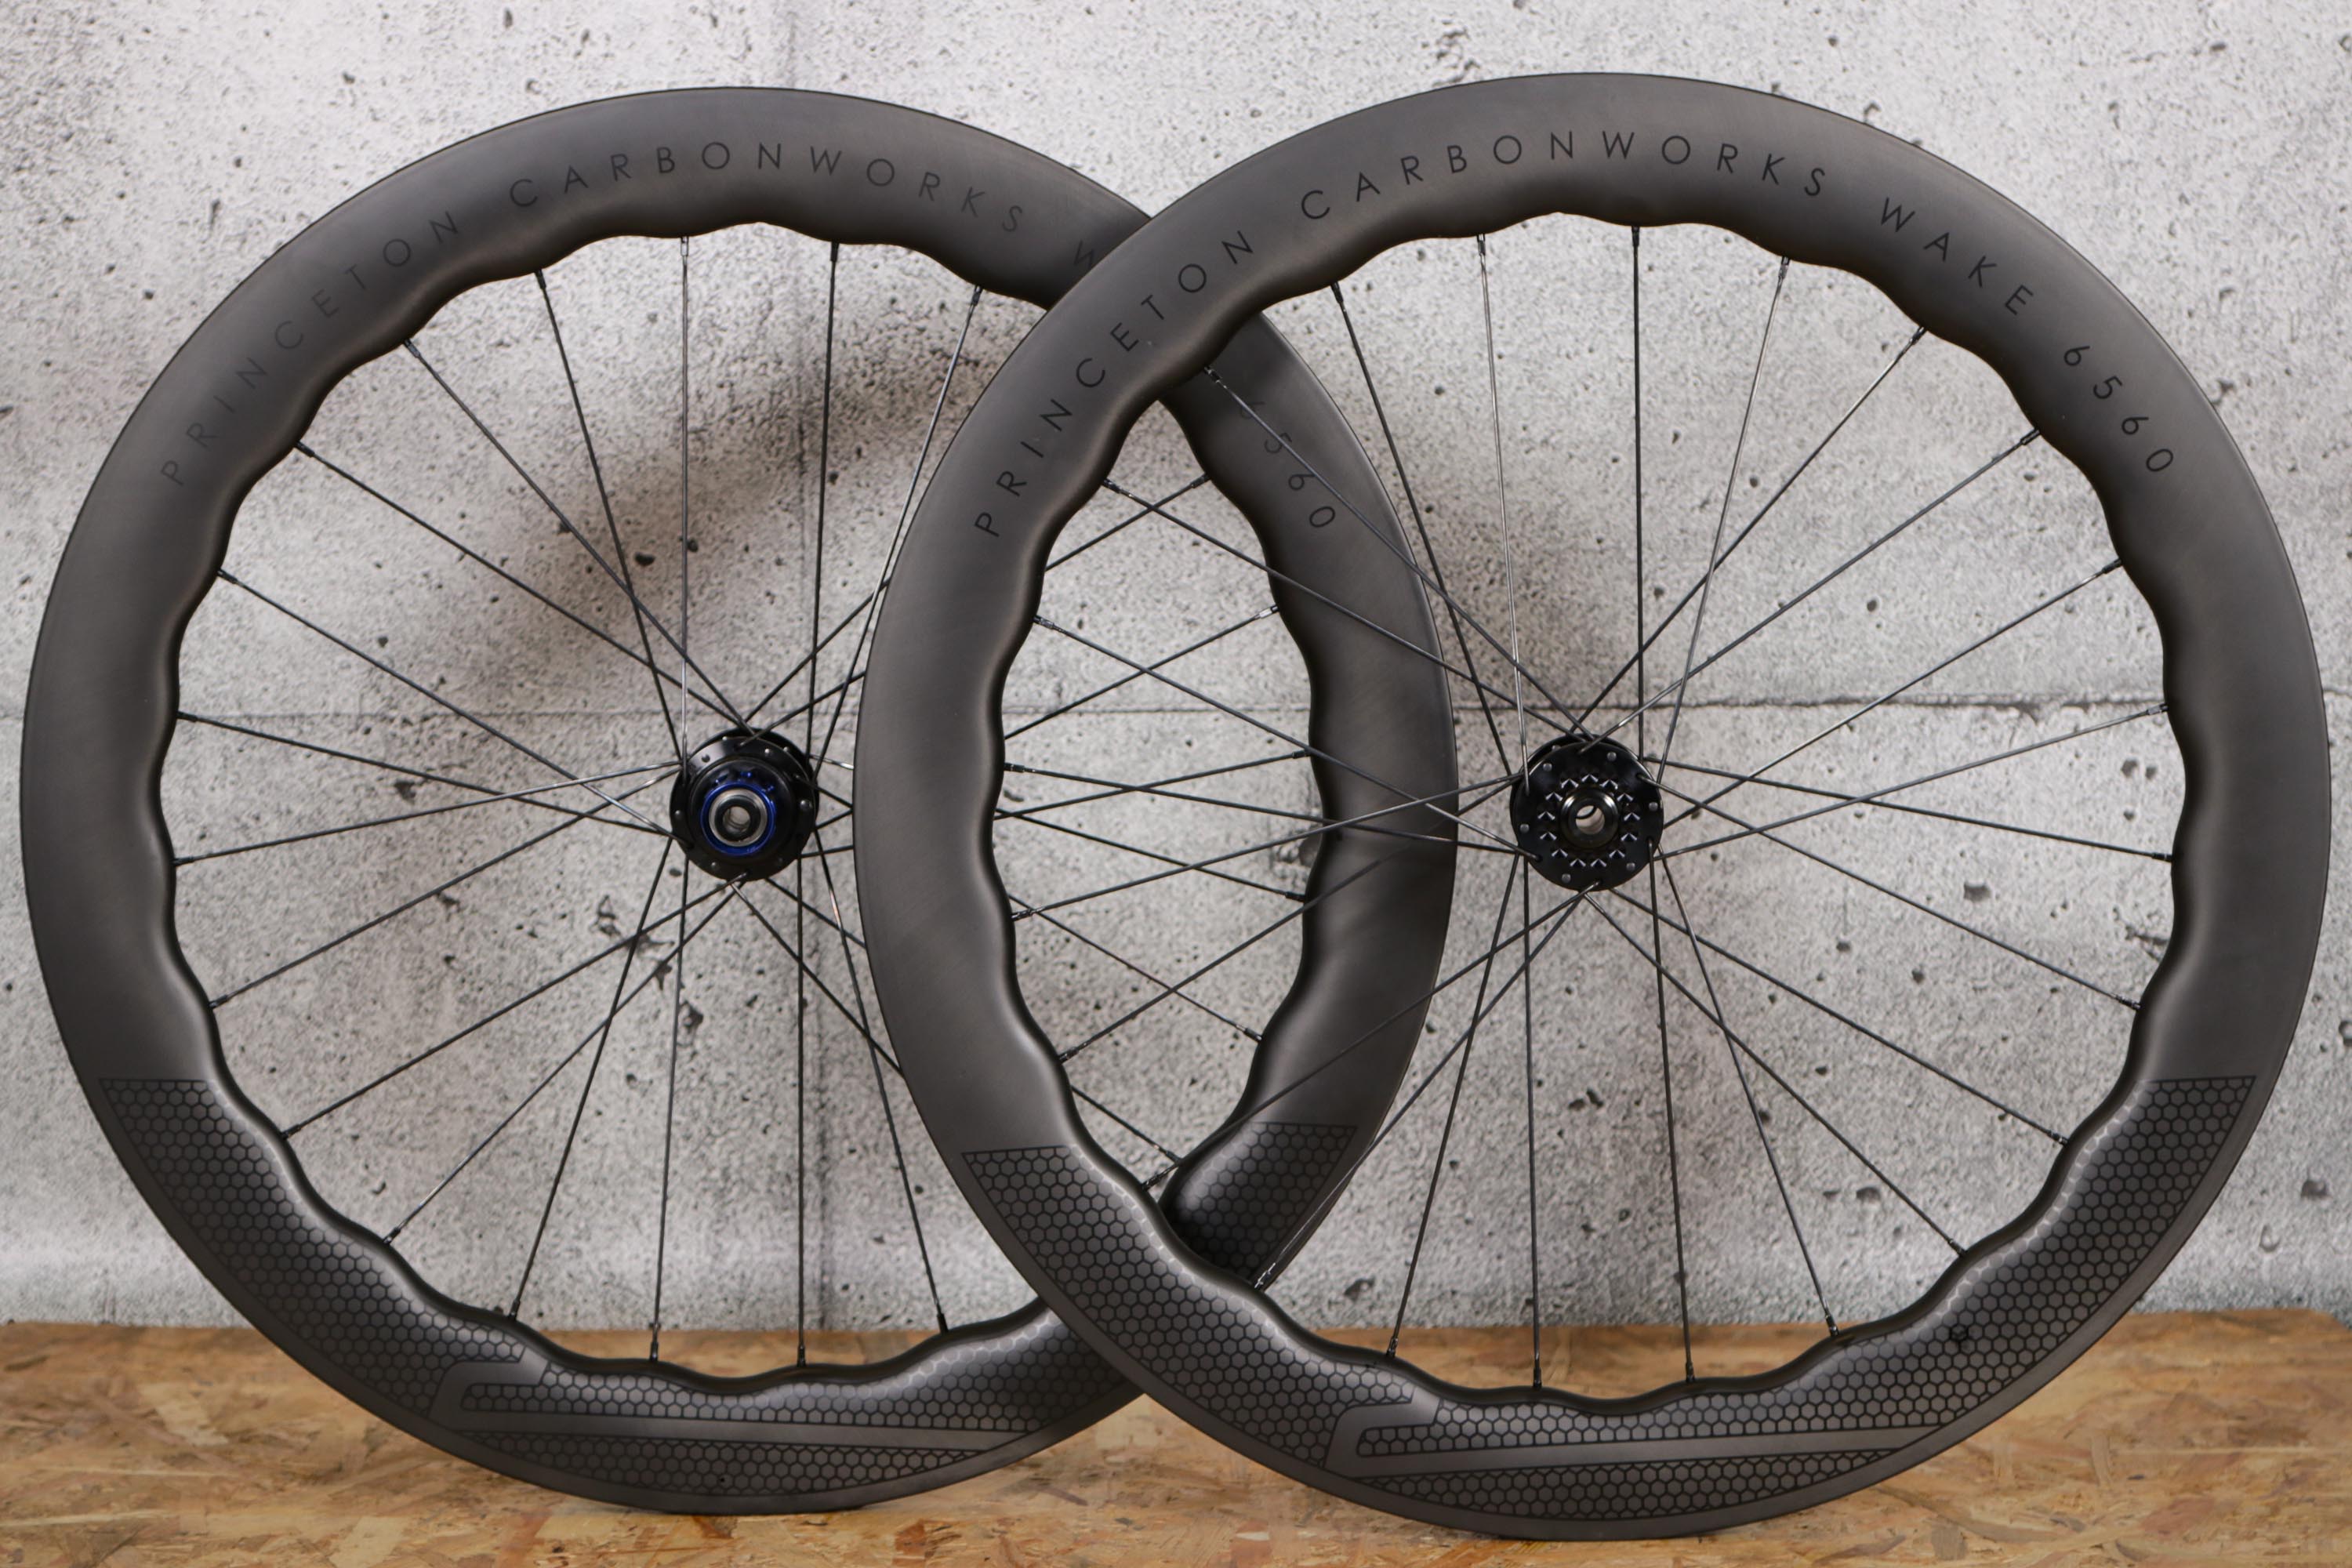 Review: Princeton CarbonWorks 6560 Disc Tune |